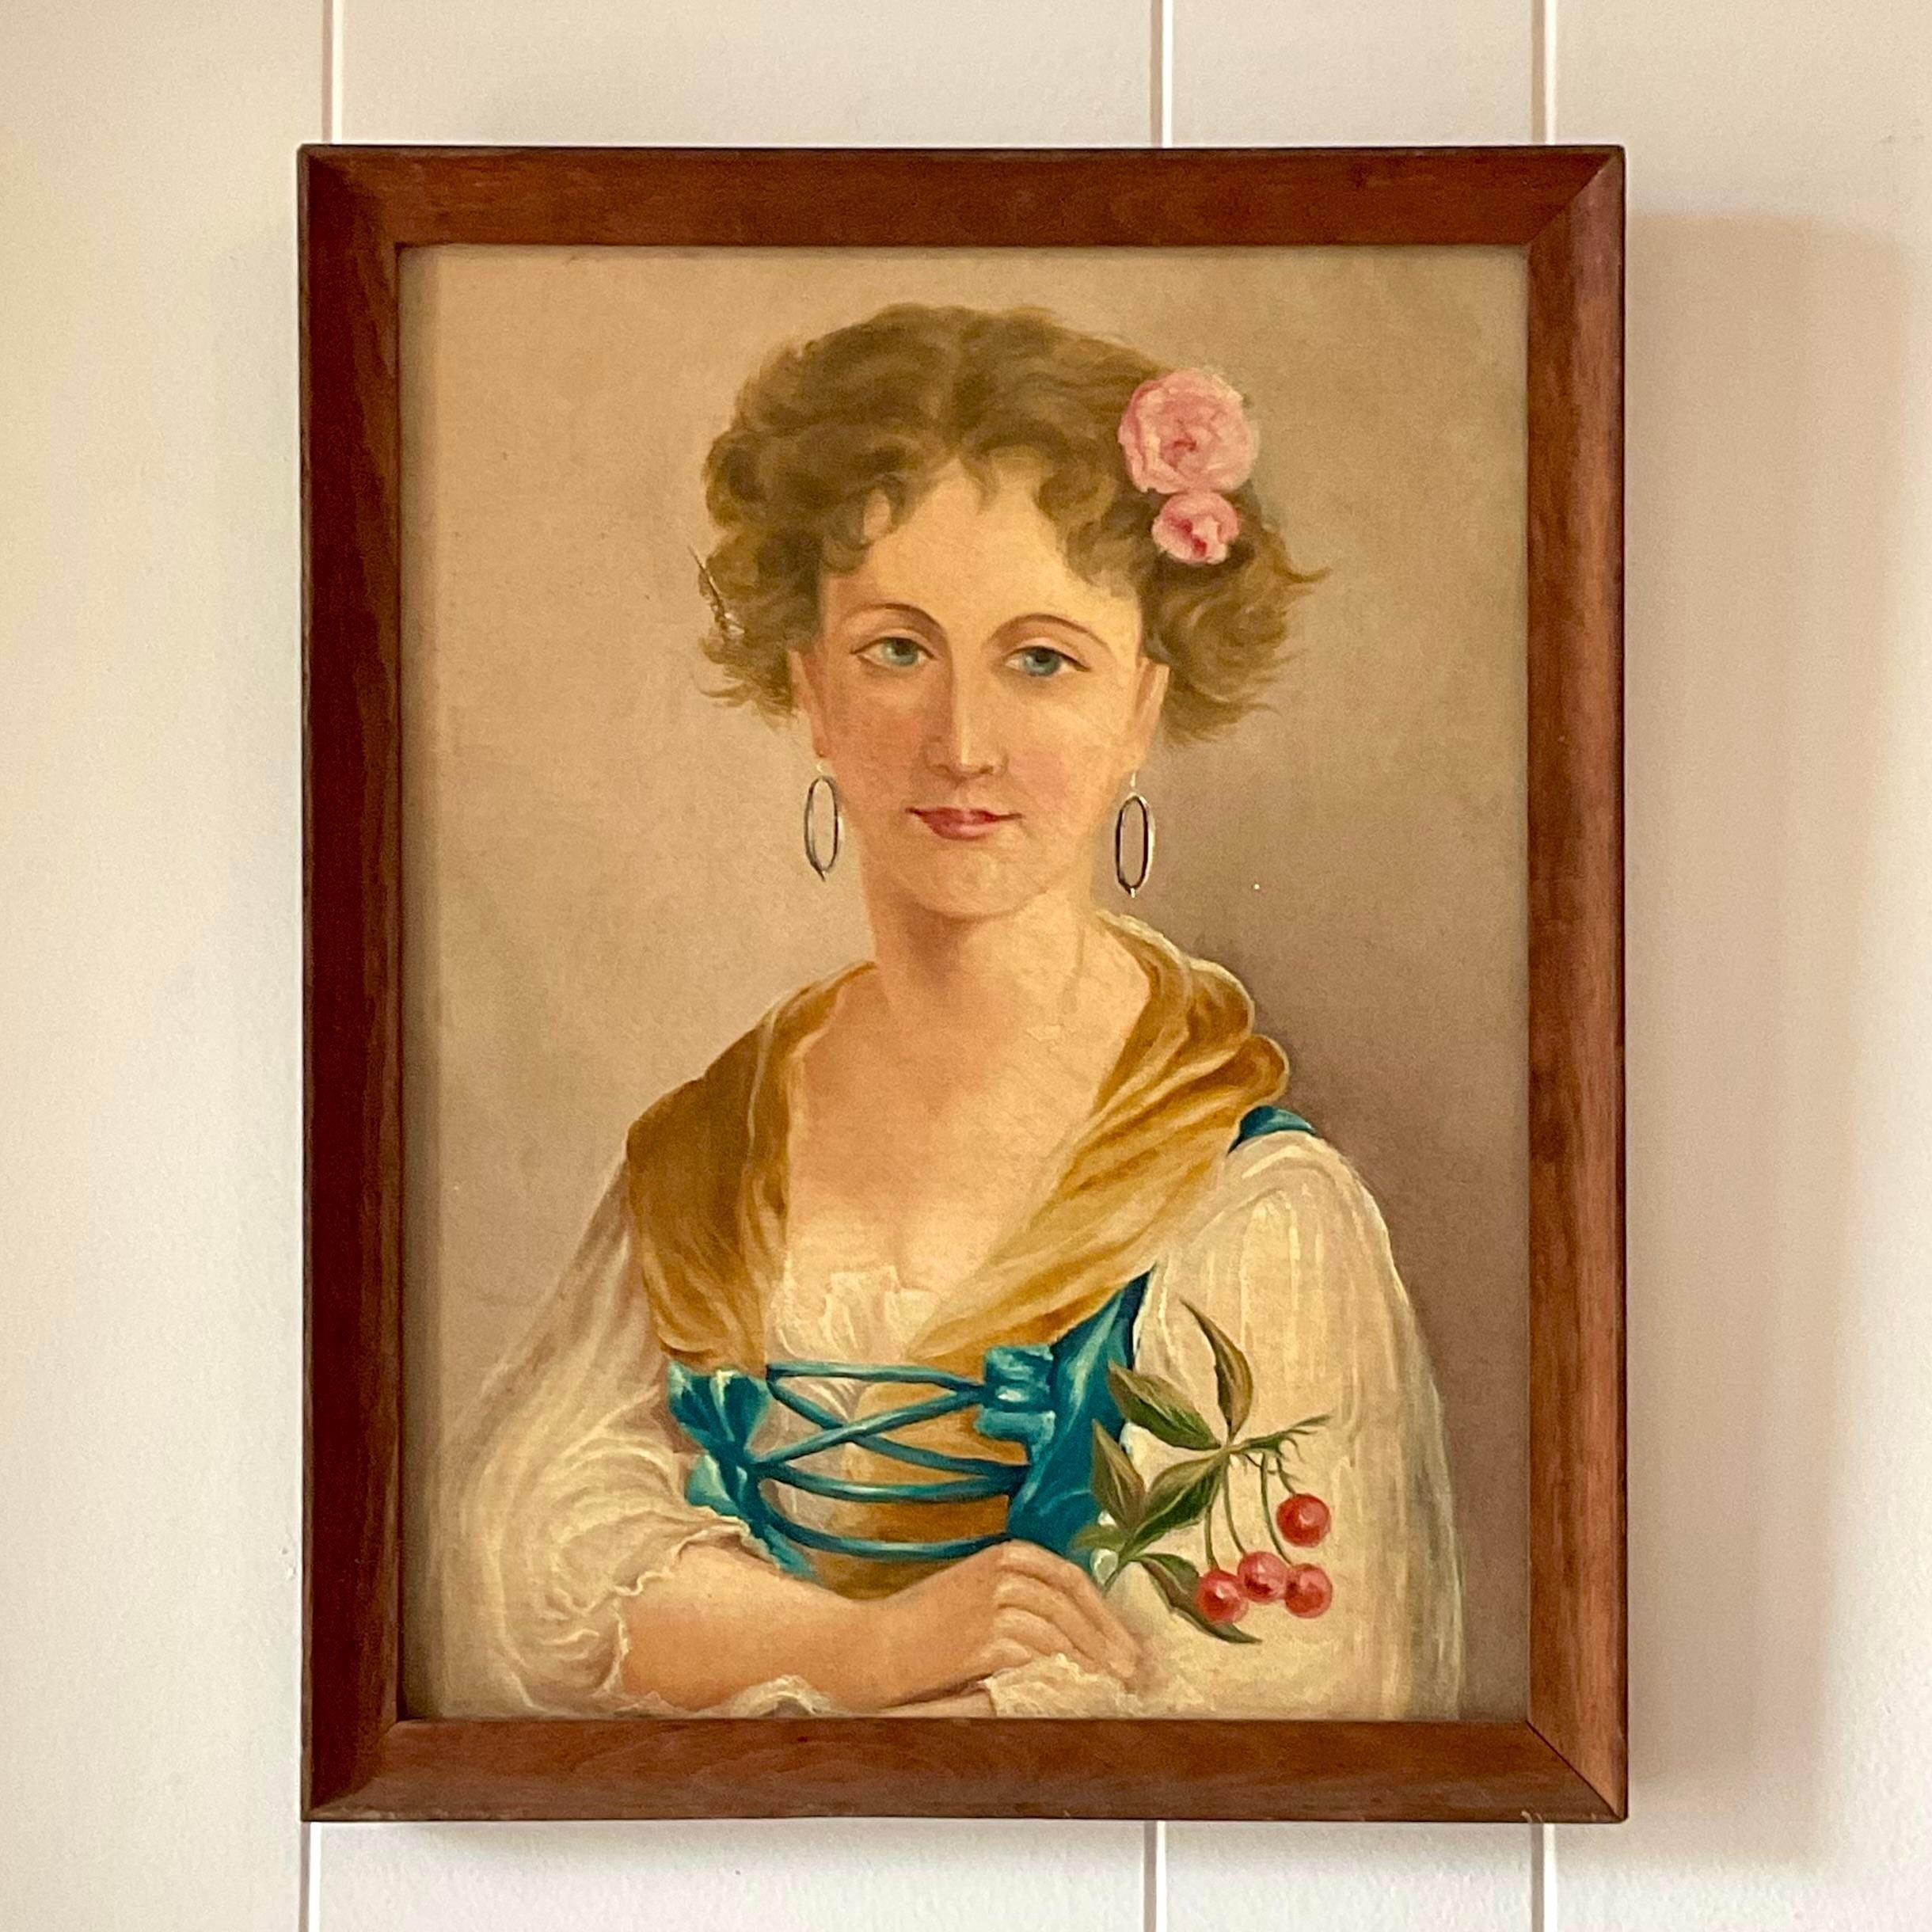 A fabulous vintage Boho oil portrait on canvas. A beautiful young woman in period dress. Acquired from a Palm Beach estate.